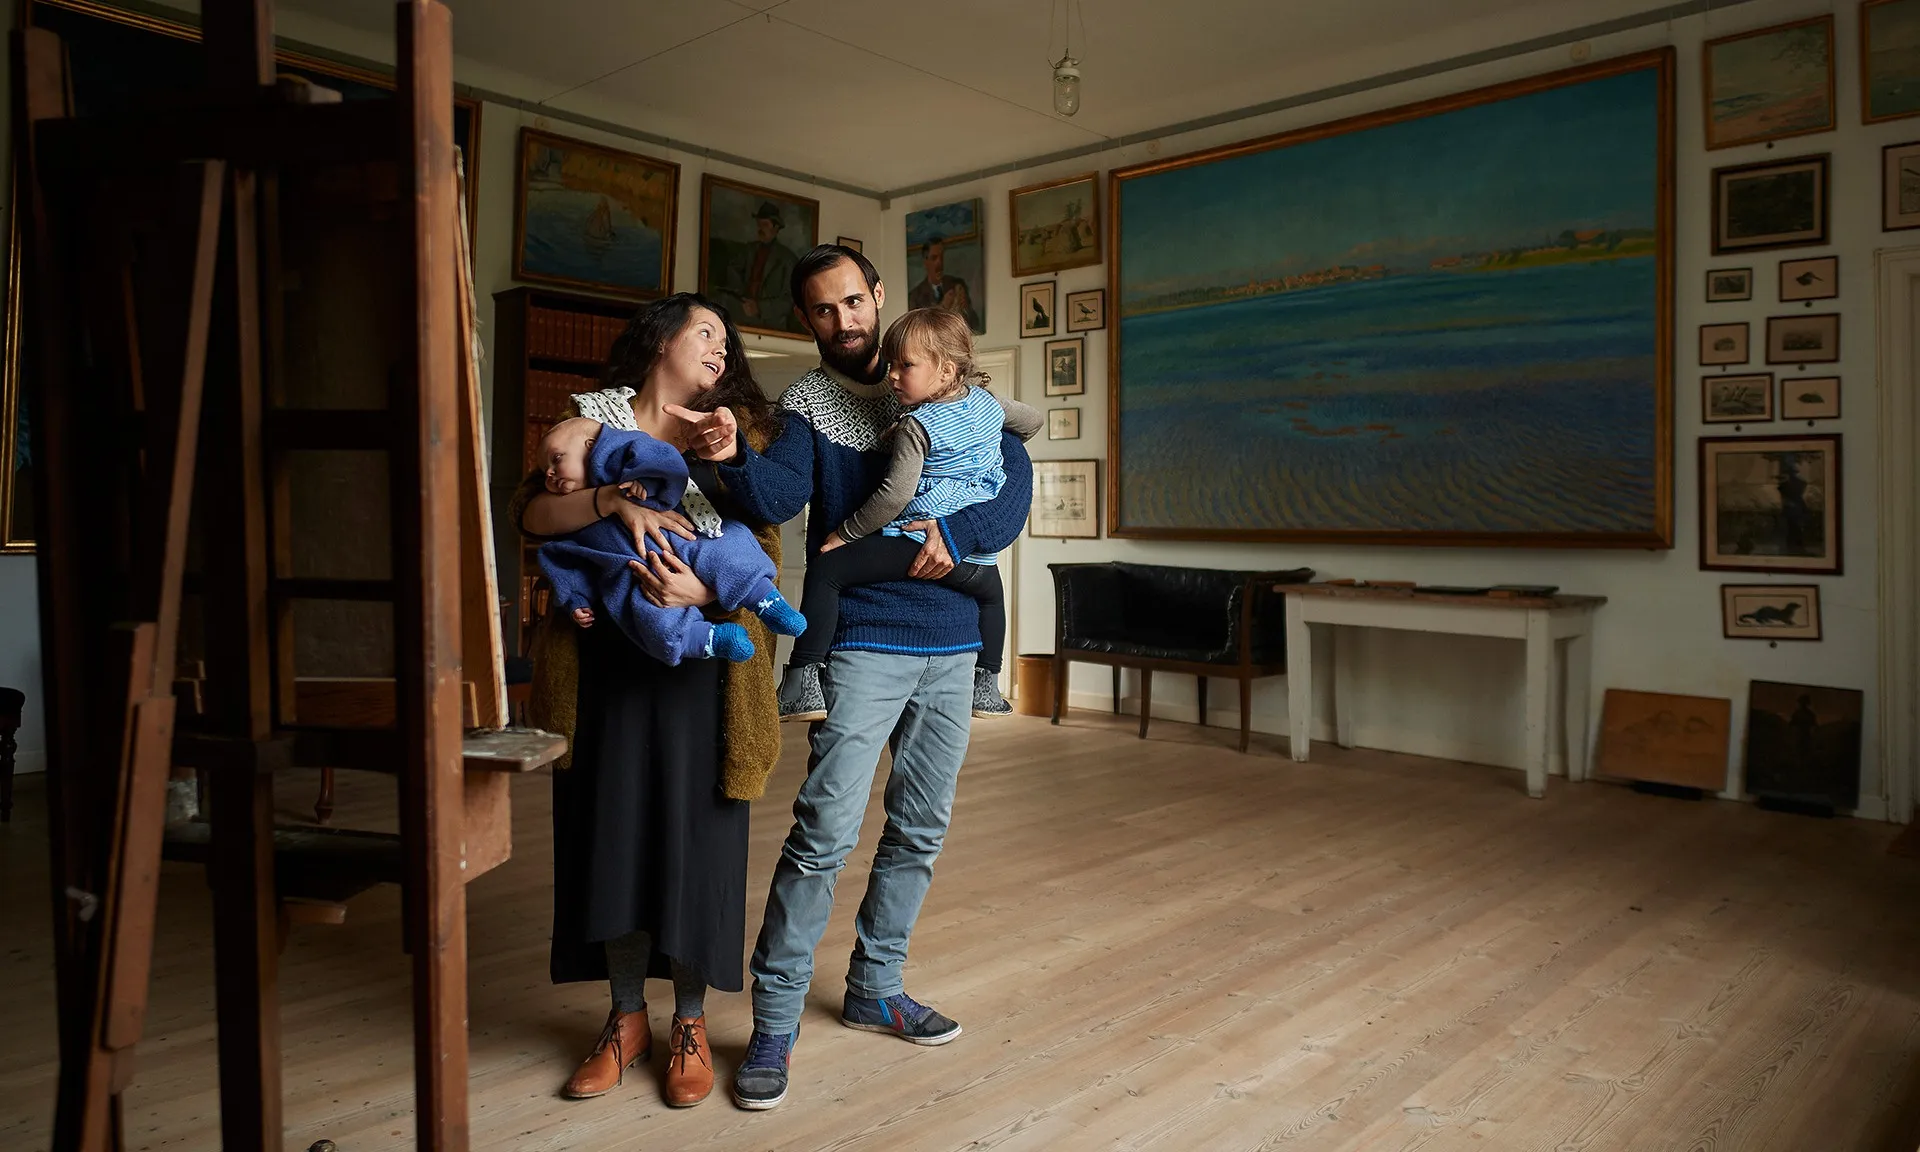 The Johannes Larsen Museum in Kerteminde offers art experiences for both children and adults